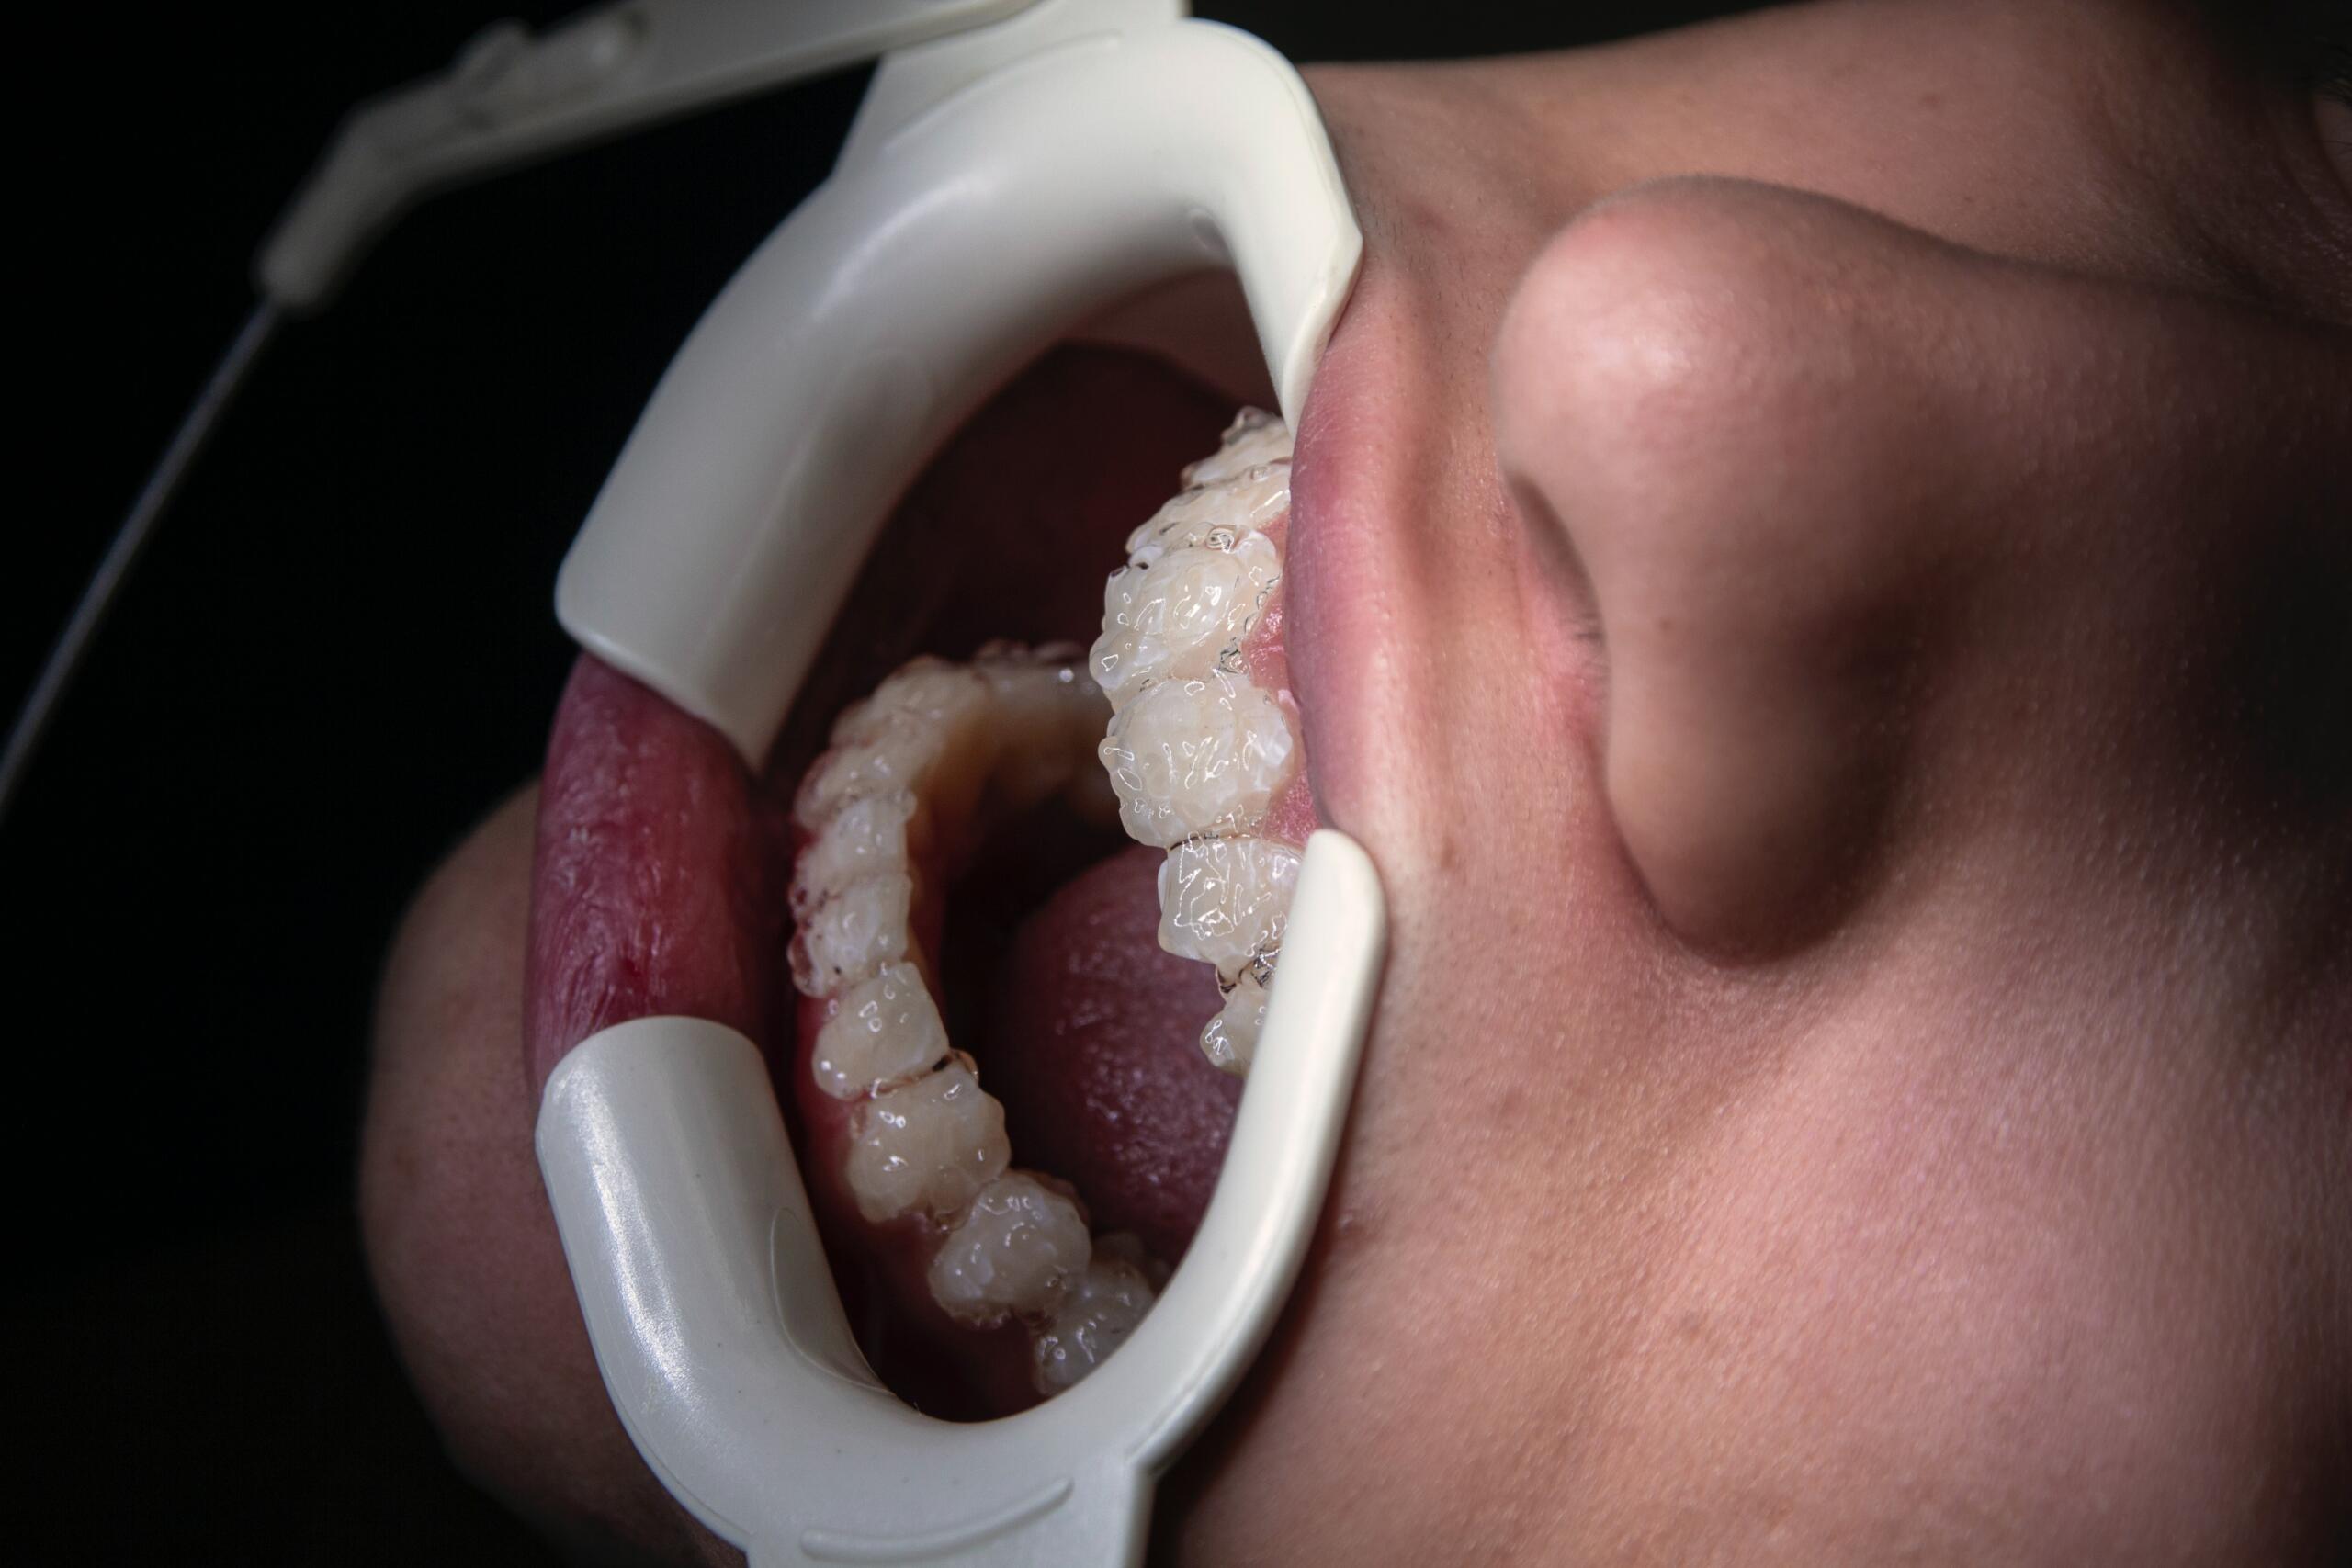 How Long After Bleaching Teeth Can You Drink Coffee?